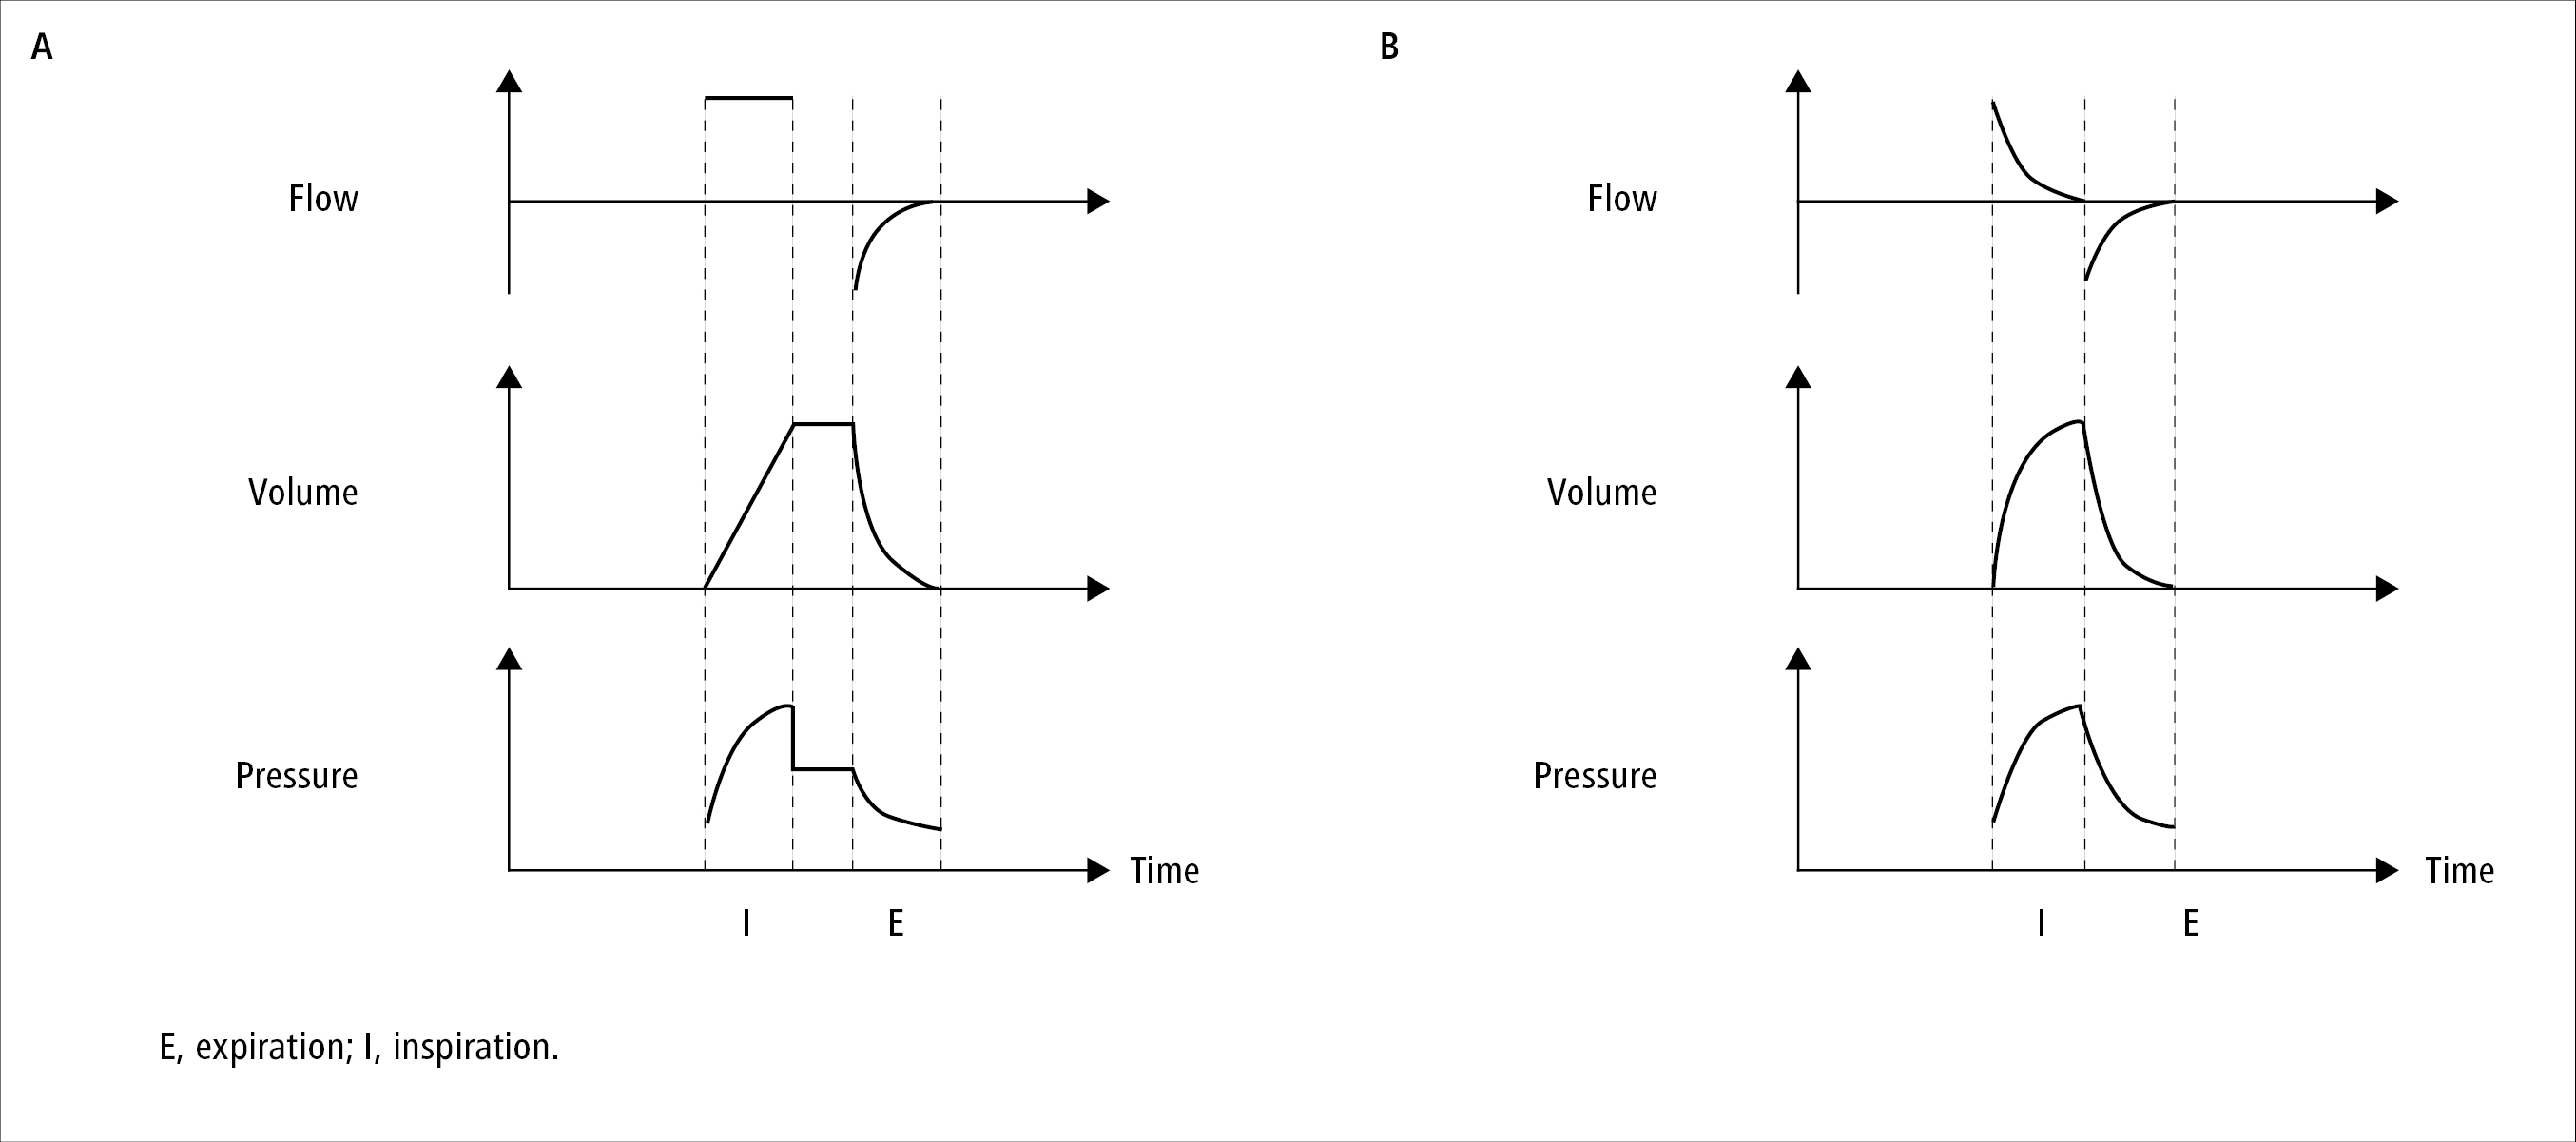 Figure 031_7351.  Relationship between time and gas flow, lung volume, and airway pressure during volume-limited ventilation with an inspiratory pause ( A ) and pressure-limited ventilation without an inspiratory pause ( B ). Positive end-expiratory pressure (PEEP) used (airway pressure >0). Inspiratory pause pressure referred to as plateau pressure. 